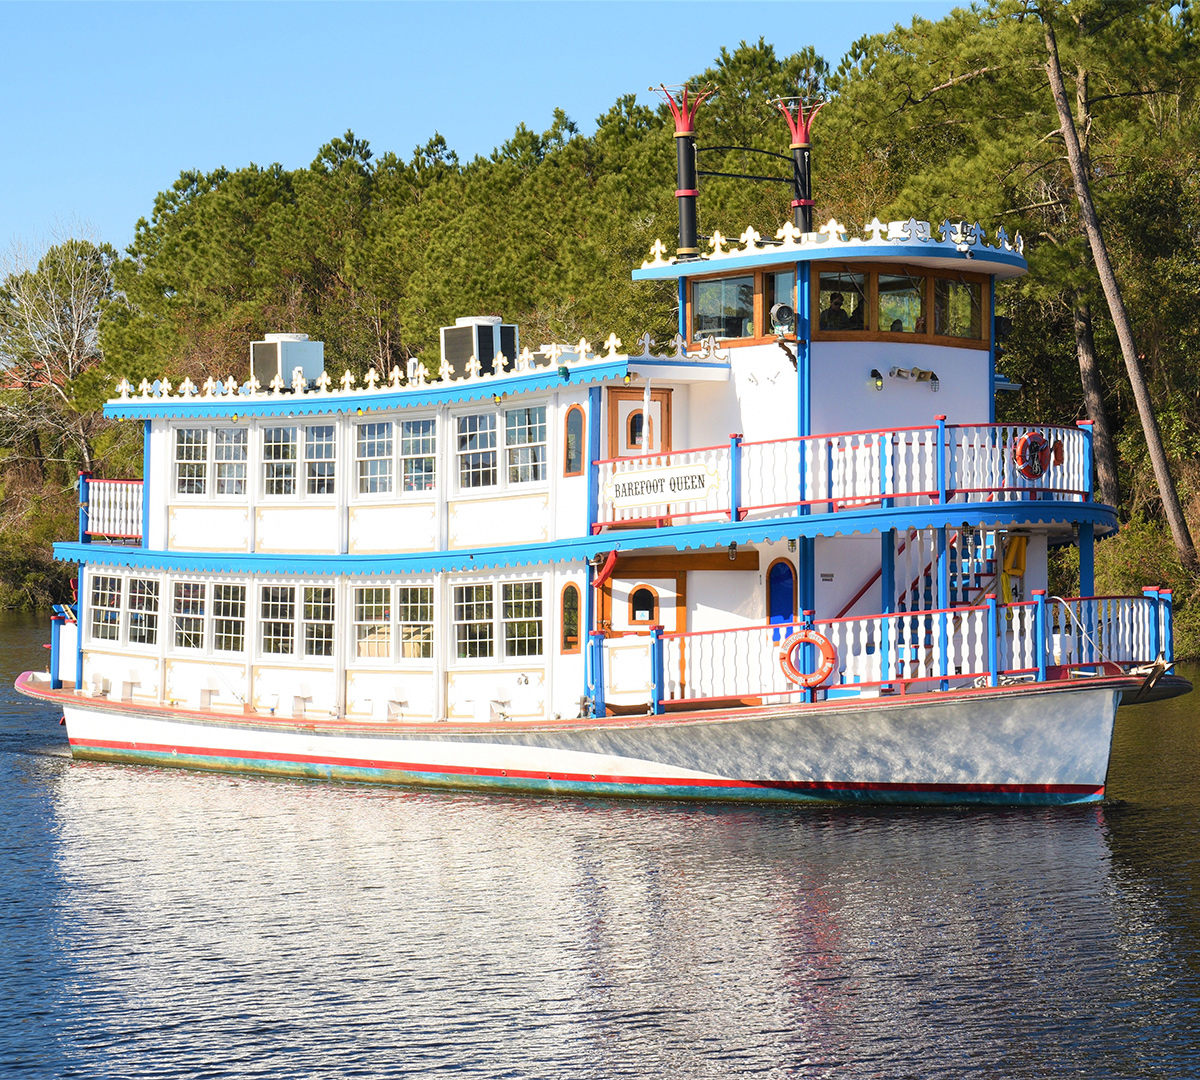 barefoot queen riverboat dinner cruise